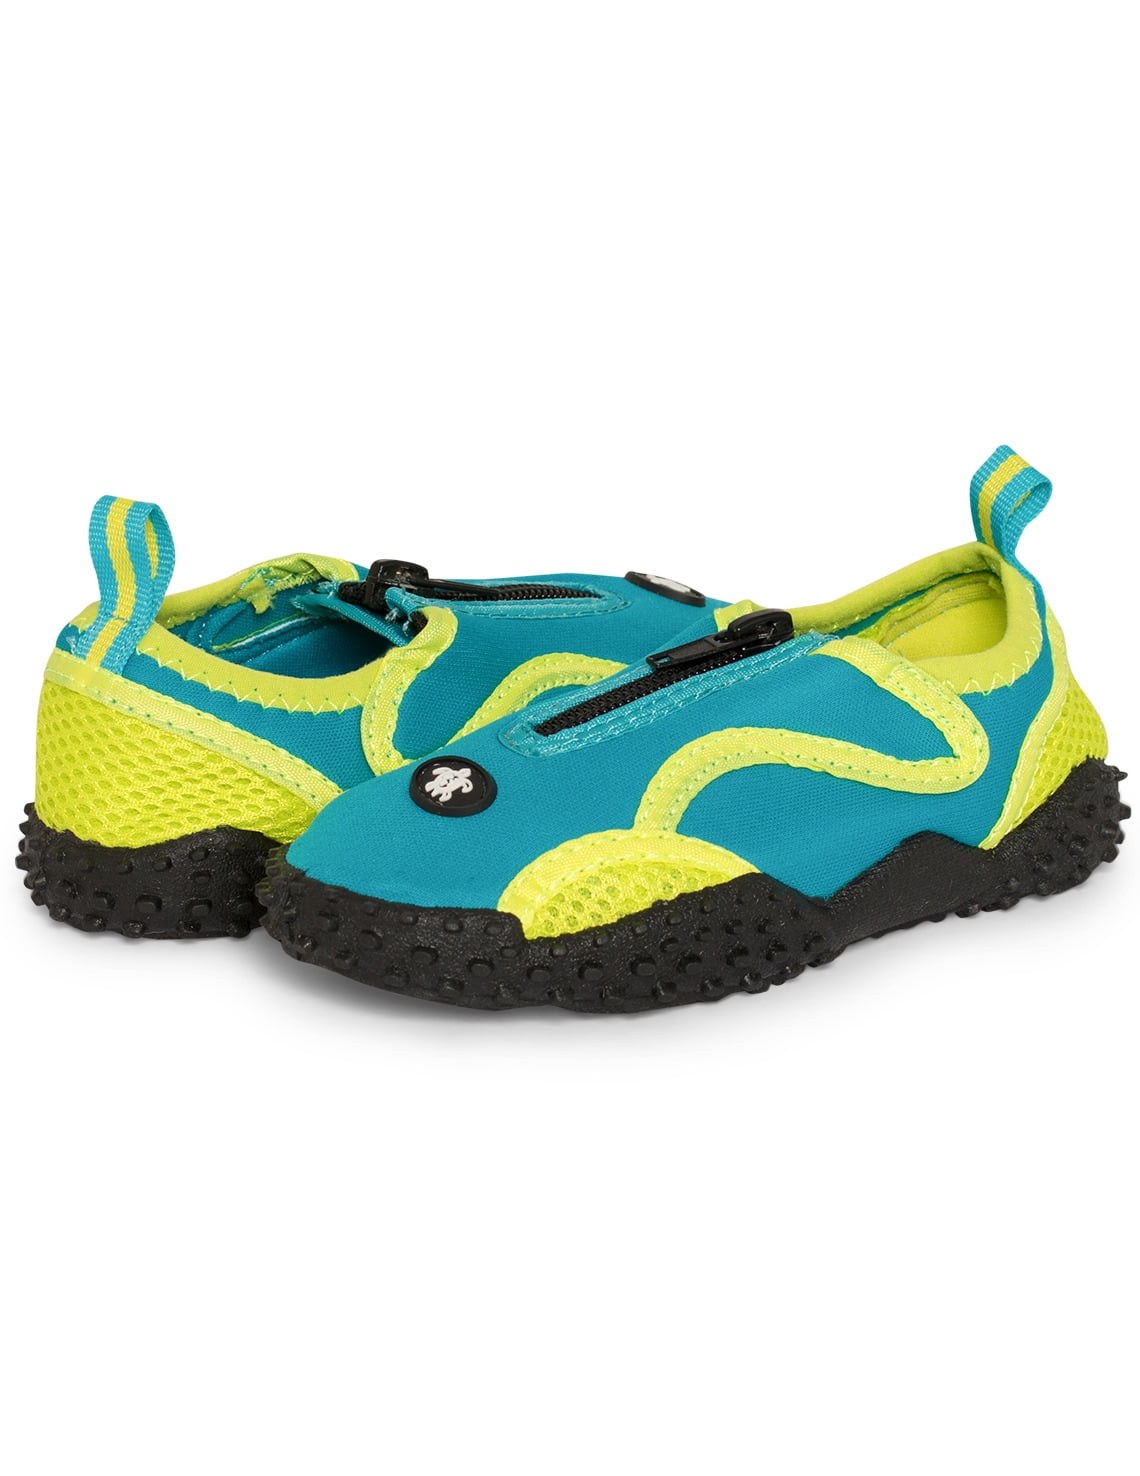 Tuga Kids Water Shoes, Teal/Lime, 4 